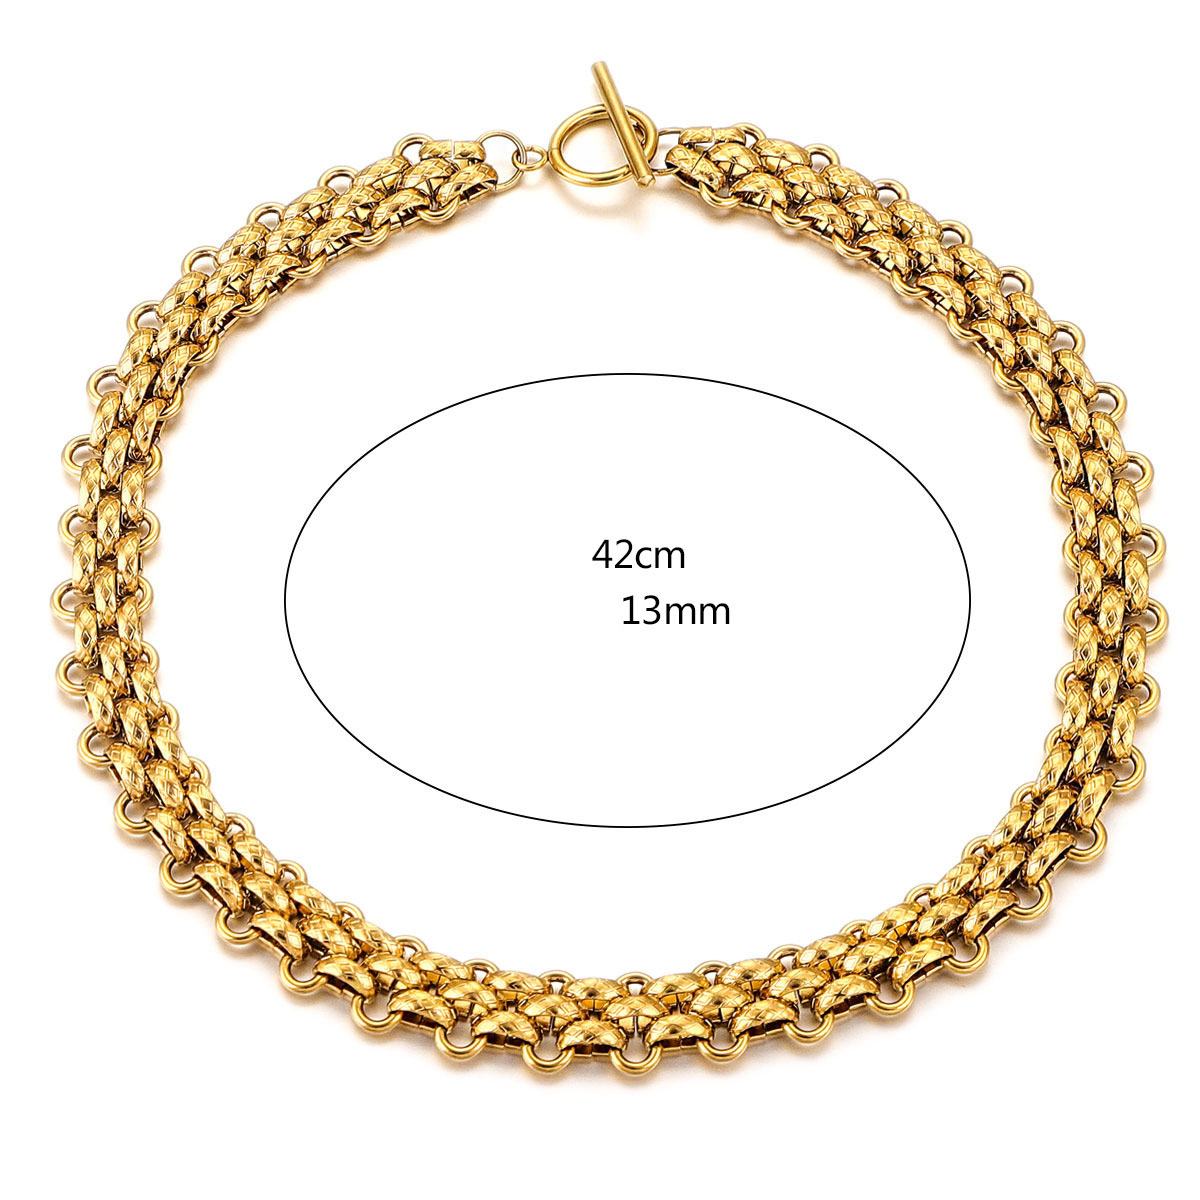 8:Texture Necklace - Gold